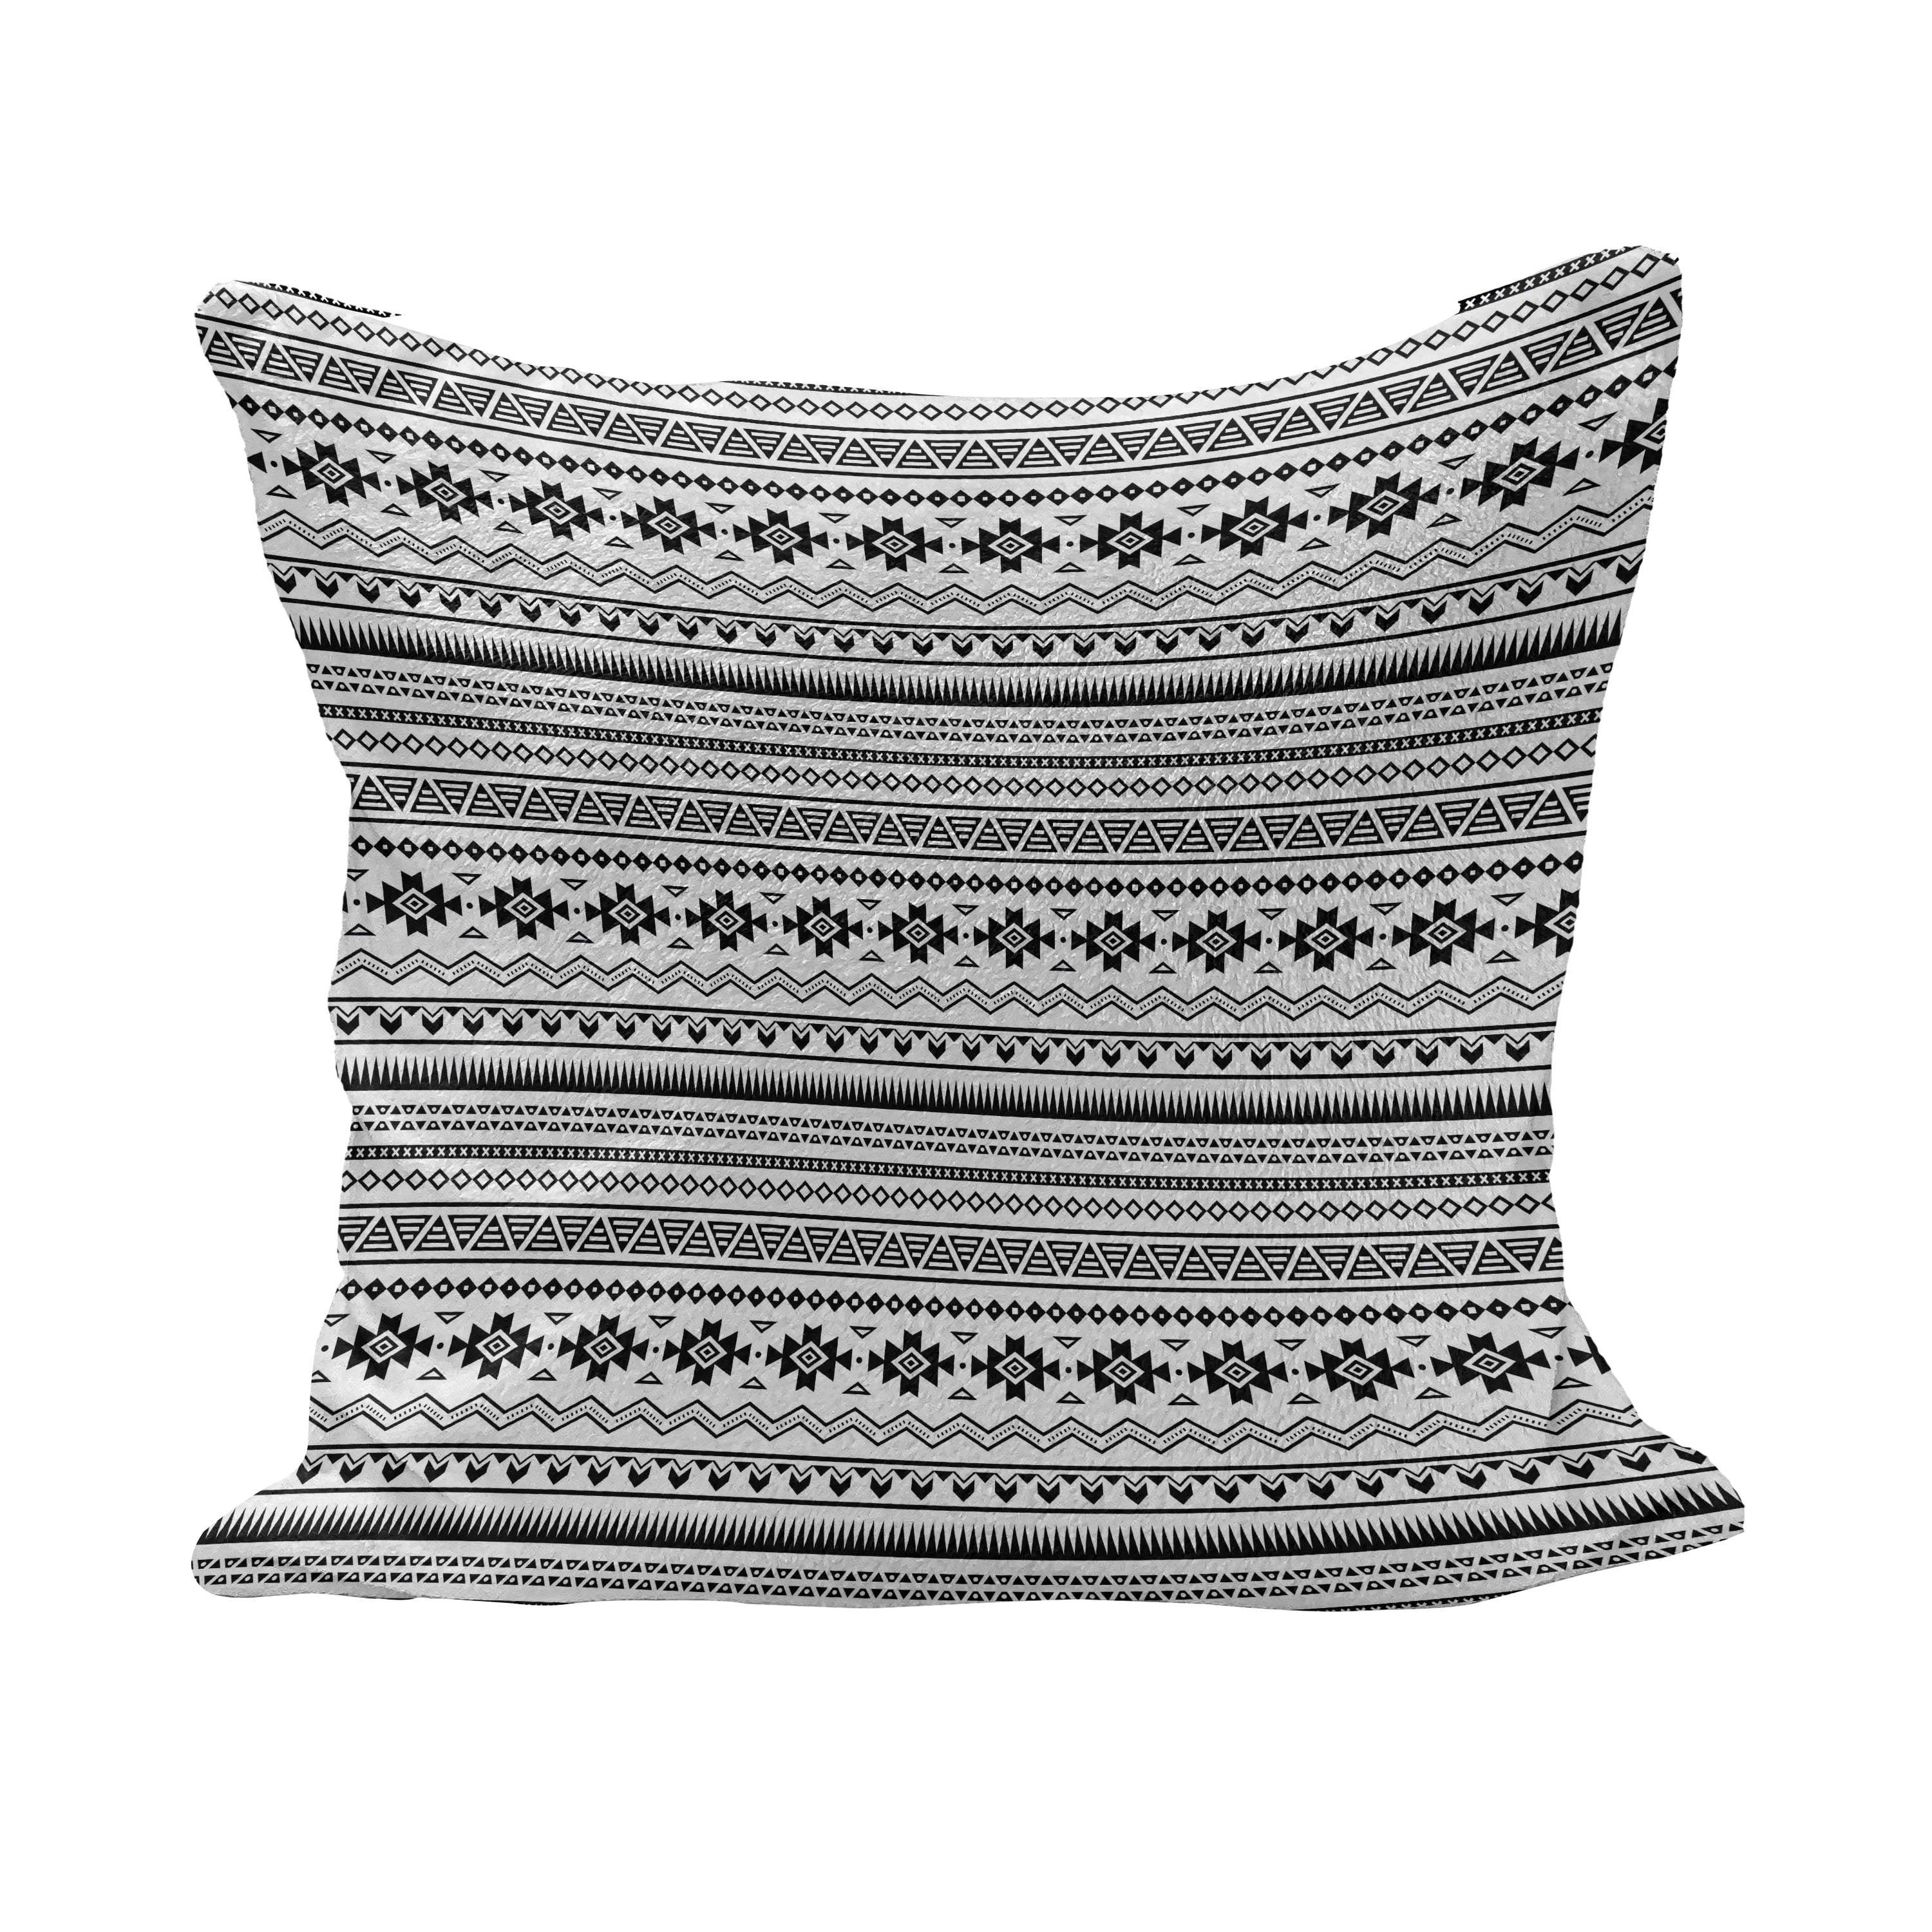 Accent Pillow 24×24 inches Anatolian Decorative Handmade Pillow Cover Cushion Cover Handwoven Suzane Pillow Ethnic Tribal Aztec 6002